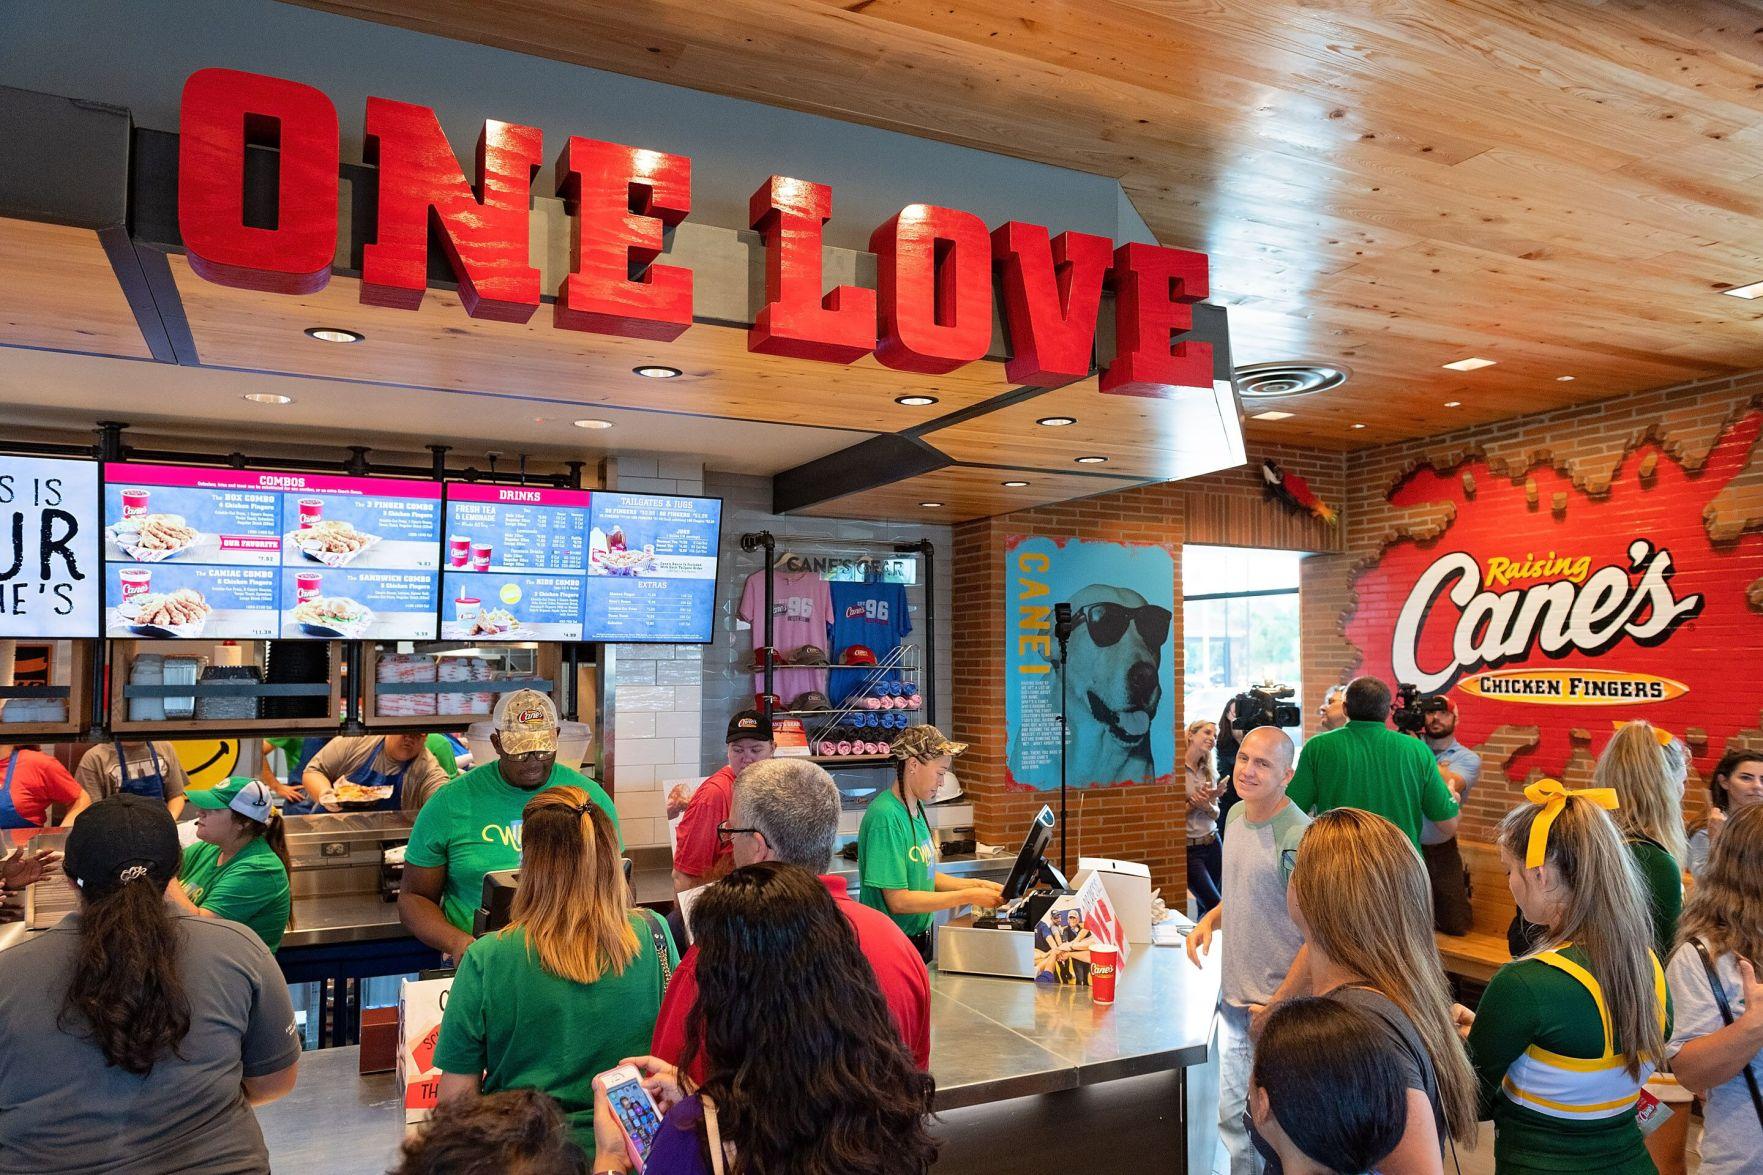 One education: Raising Cane’s offering tuition discounts